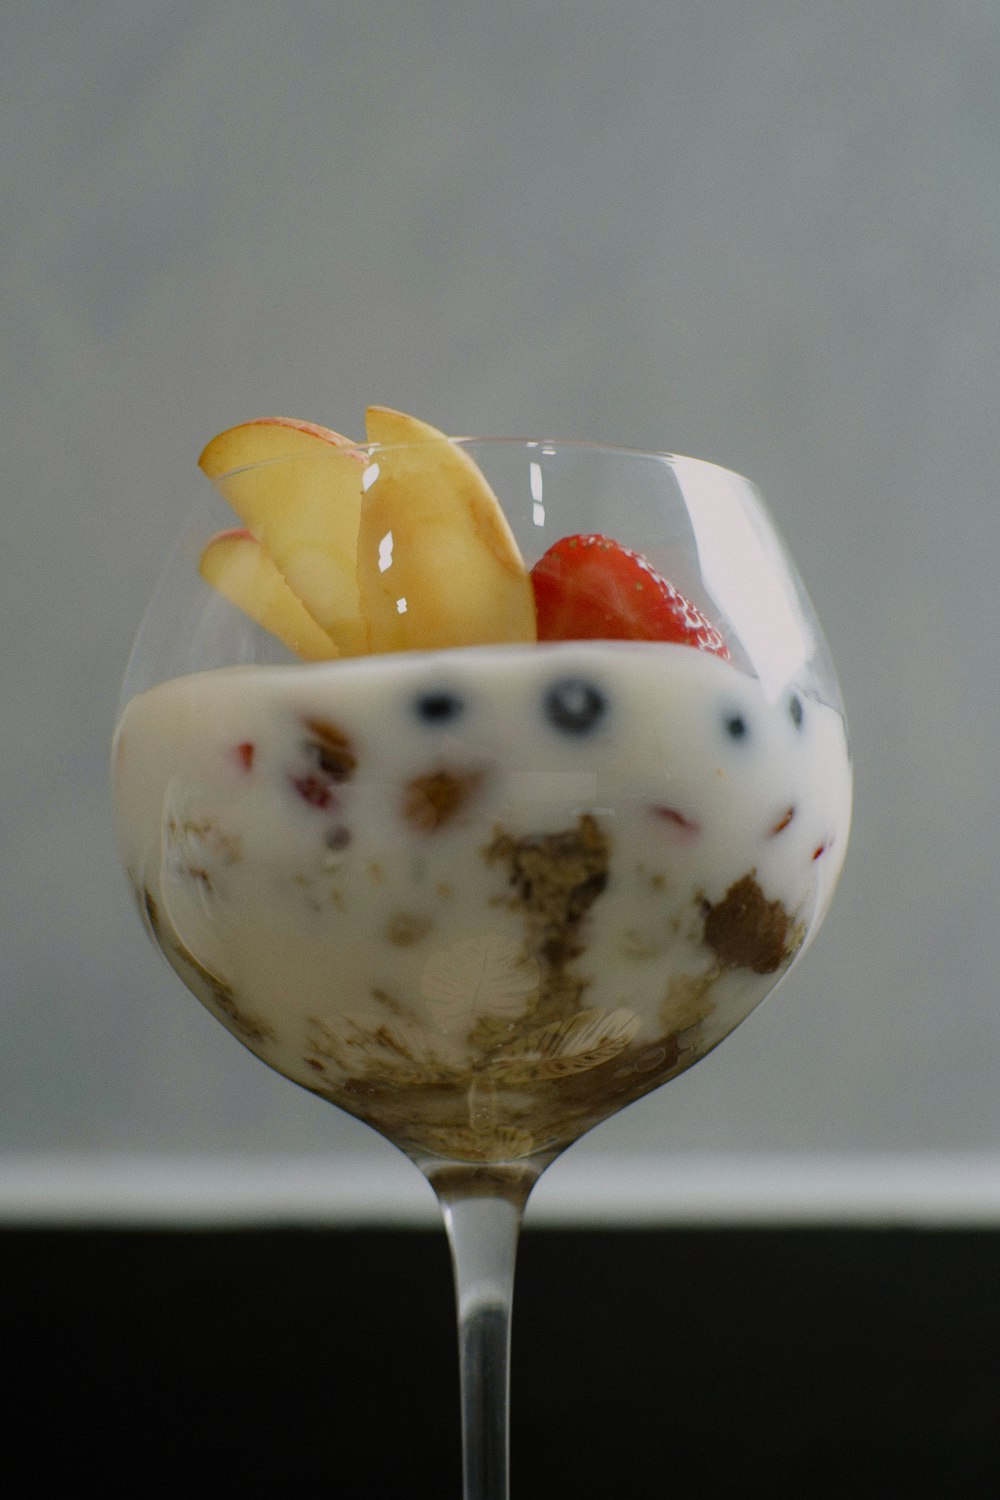 a dessert in a wine glass with fruit on top